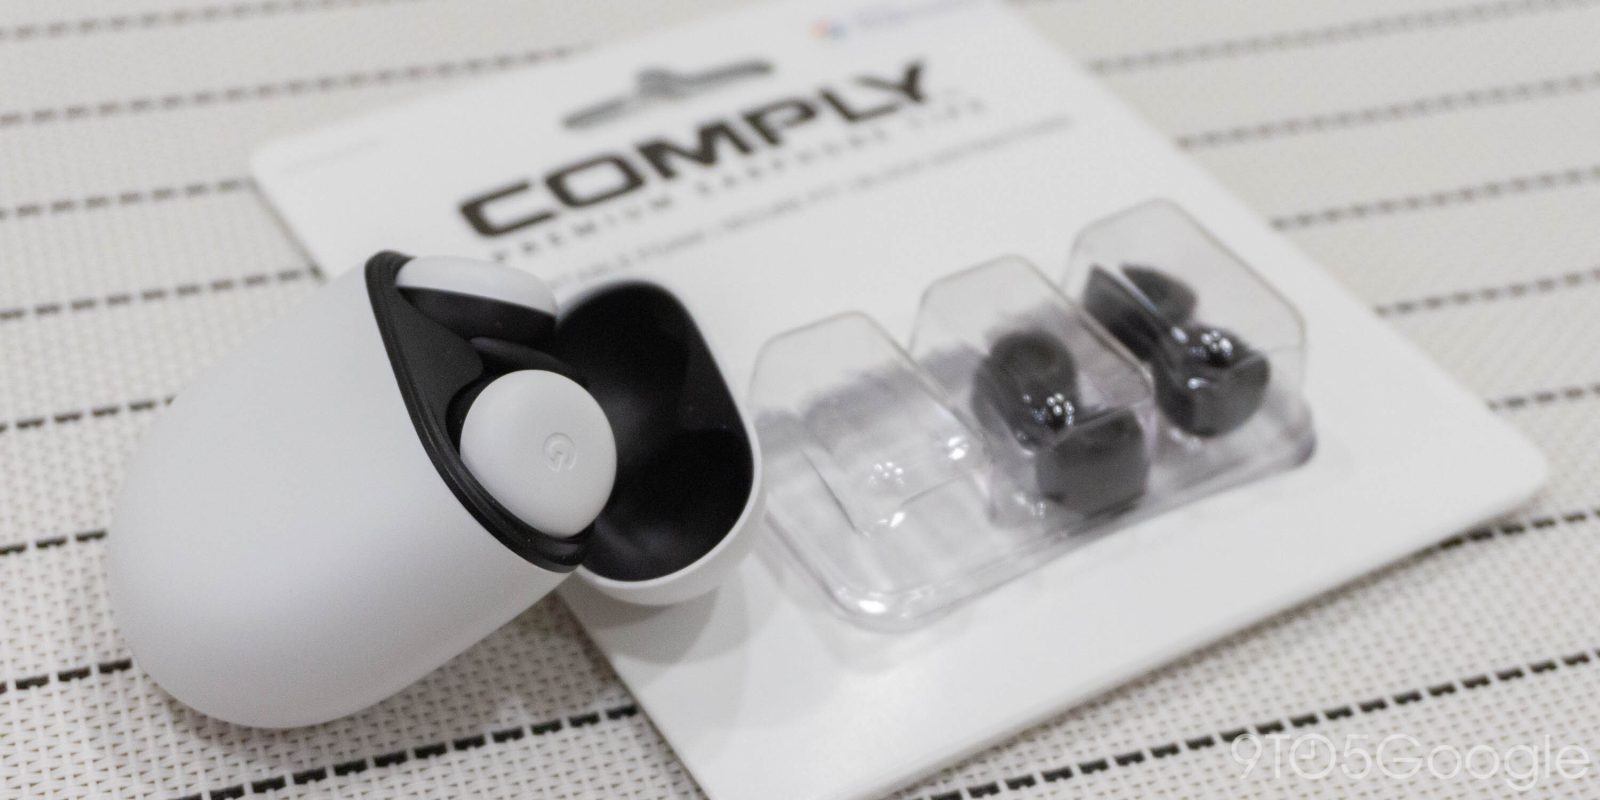 Comply foam tips for Google Pixel Buds